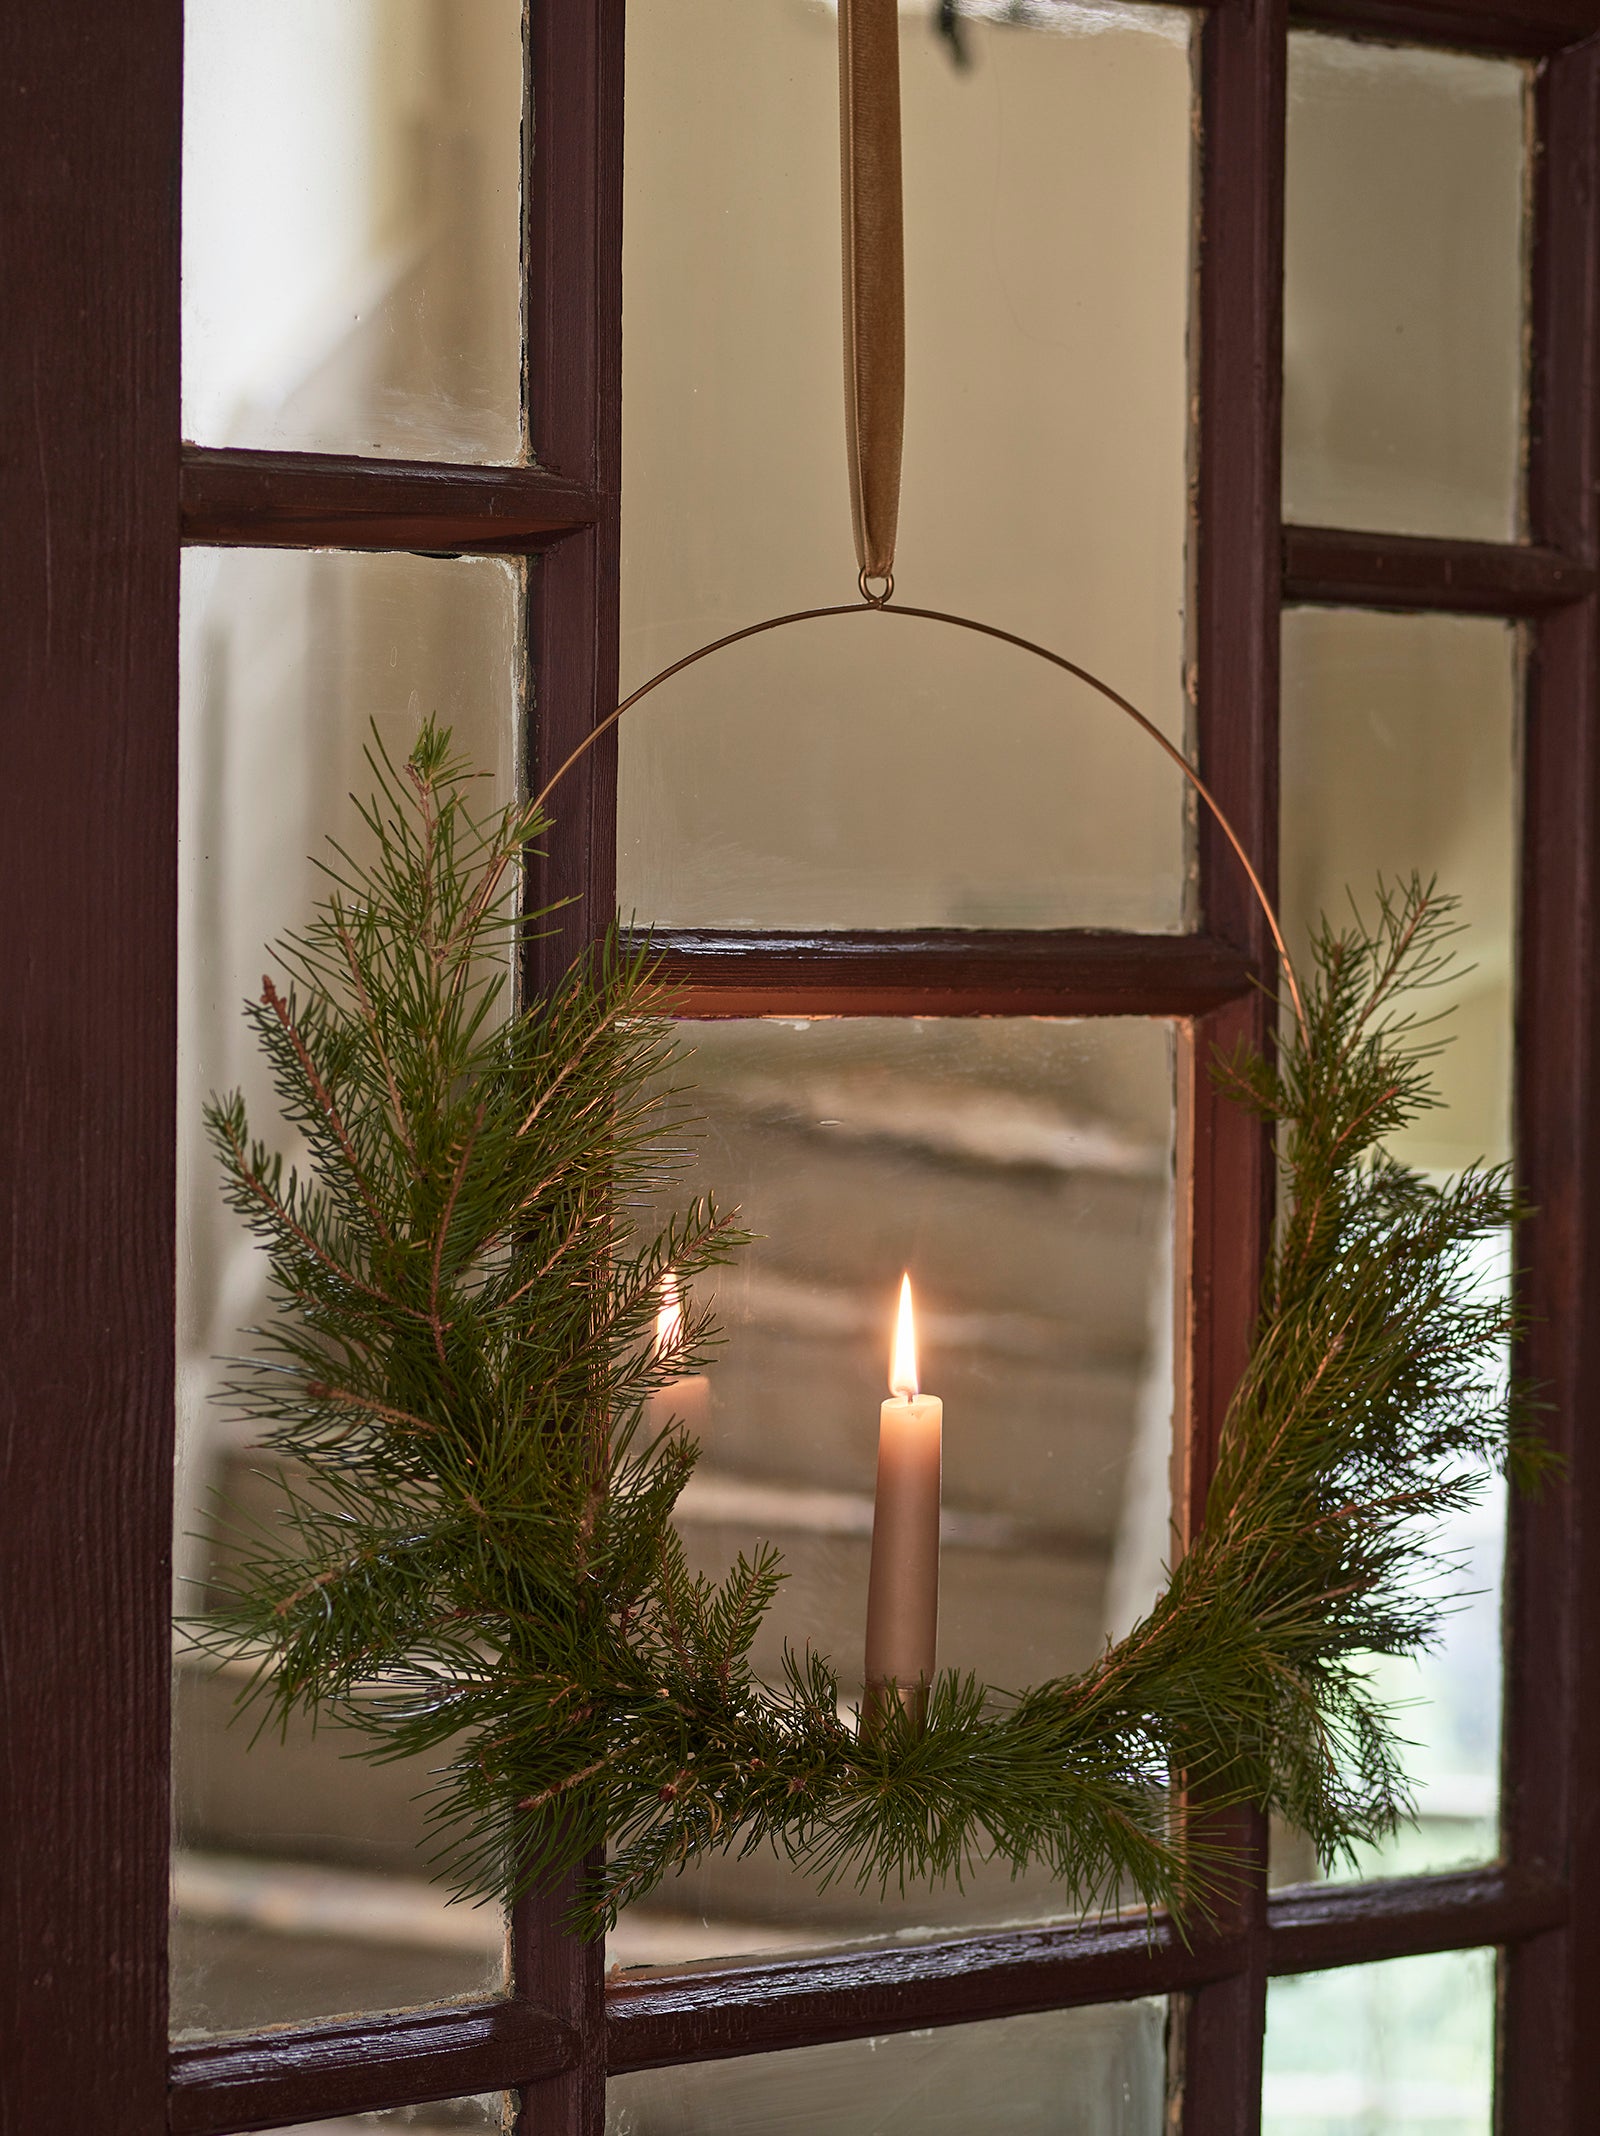 View through a glass door with a foliage wreath and lit candle, staircase in the background.